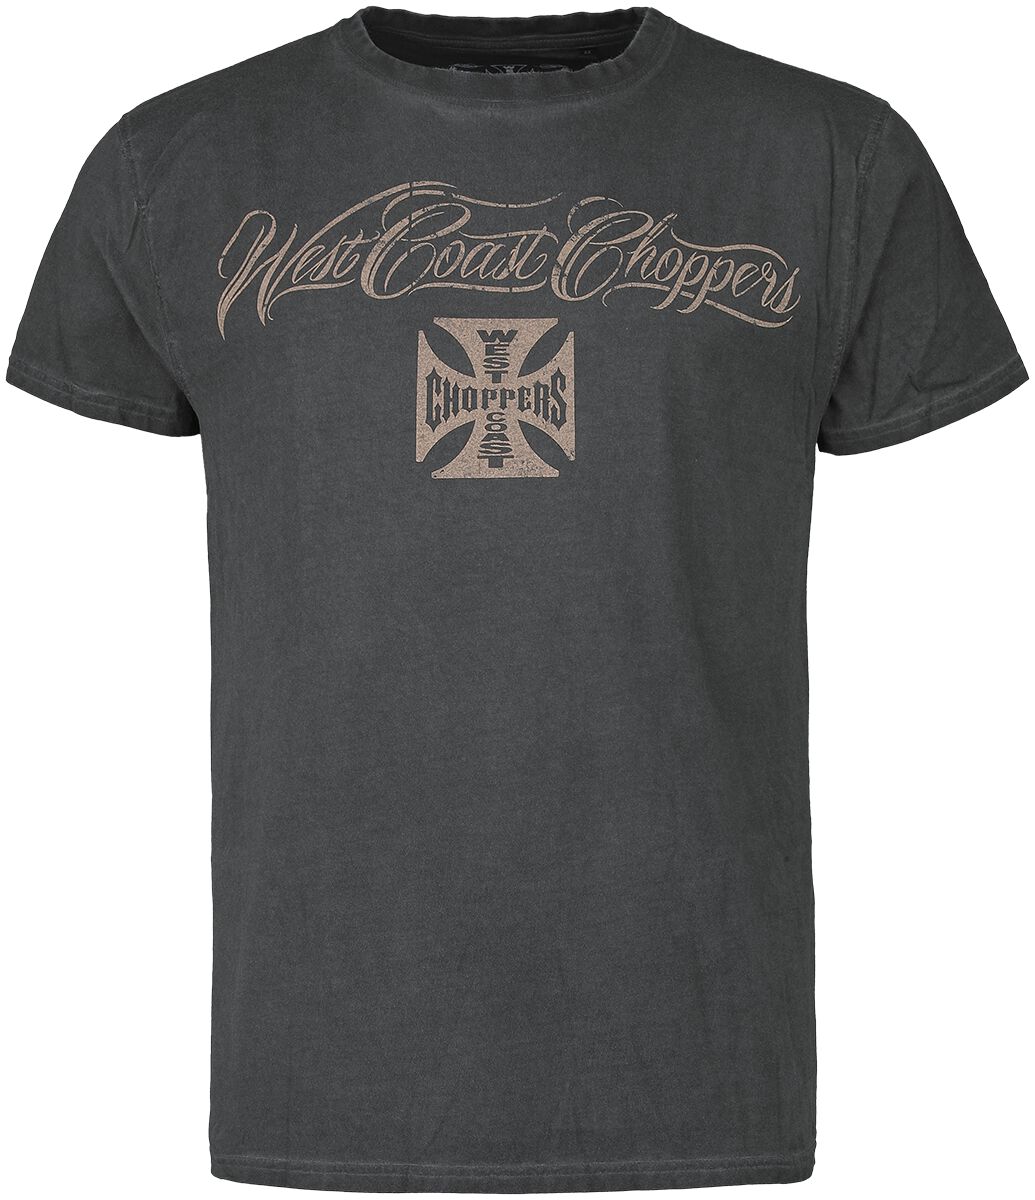 Image of T-Shirt di West Coast Choppers - Eagle crest - S a 3XL - Uomo - antracite